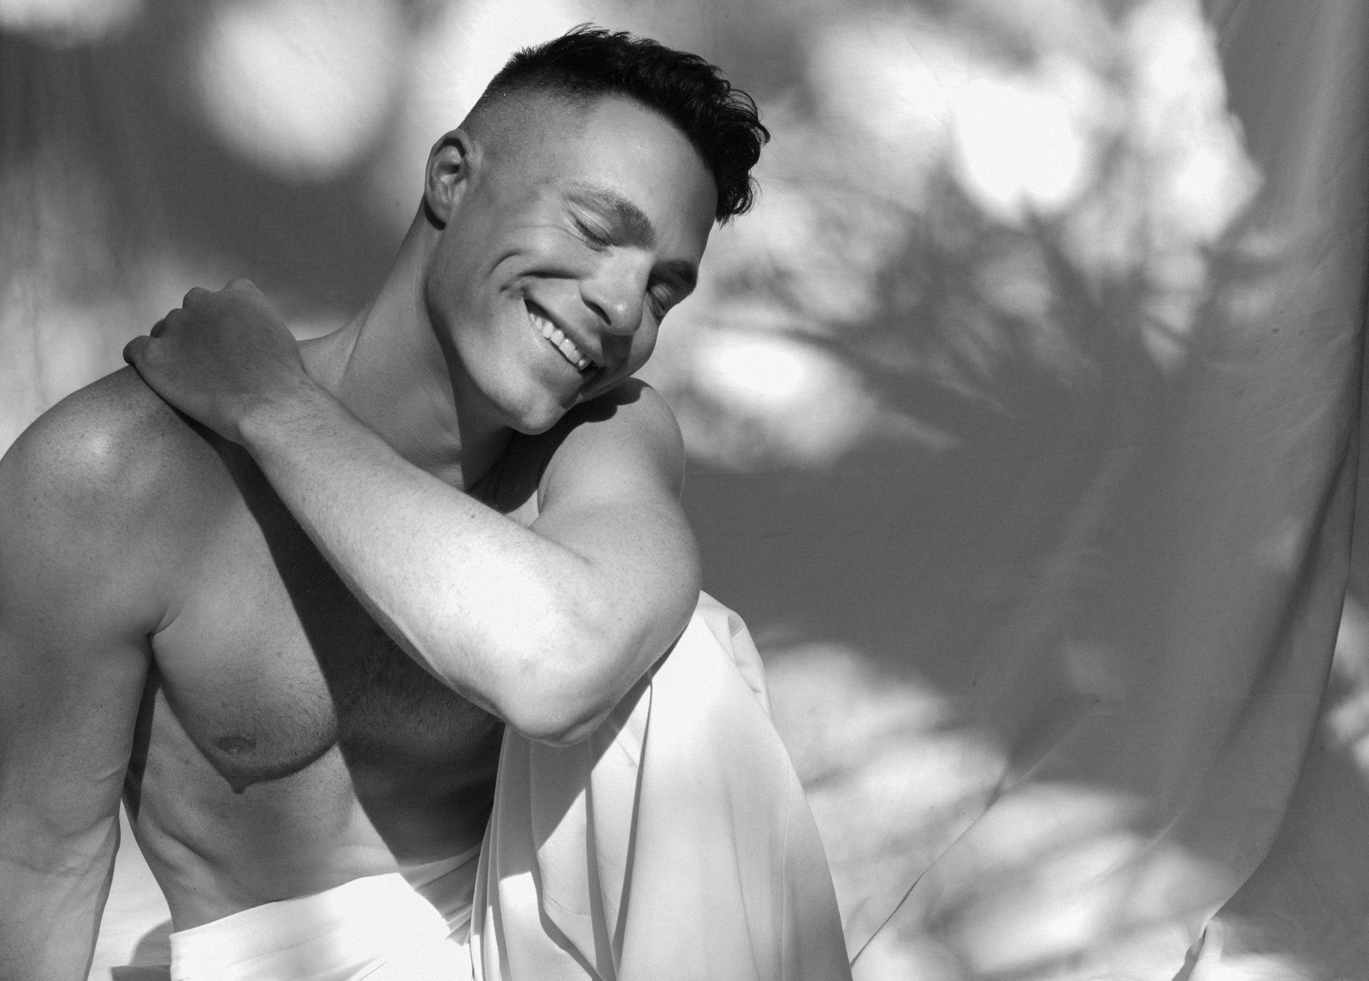 Taking Pride: Colton Haynes Gets Real About His Coming Out Journey In His New Memoir, “Miss Memory Lane”